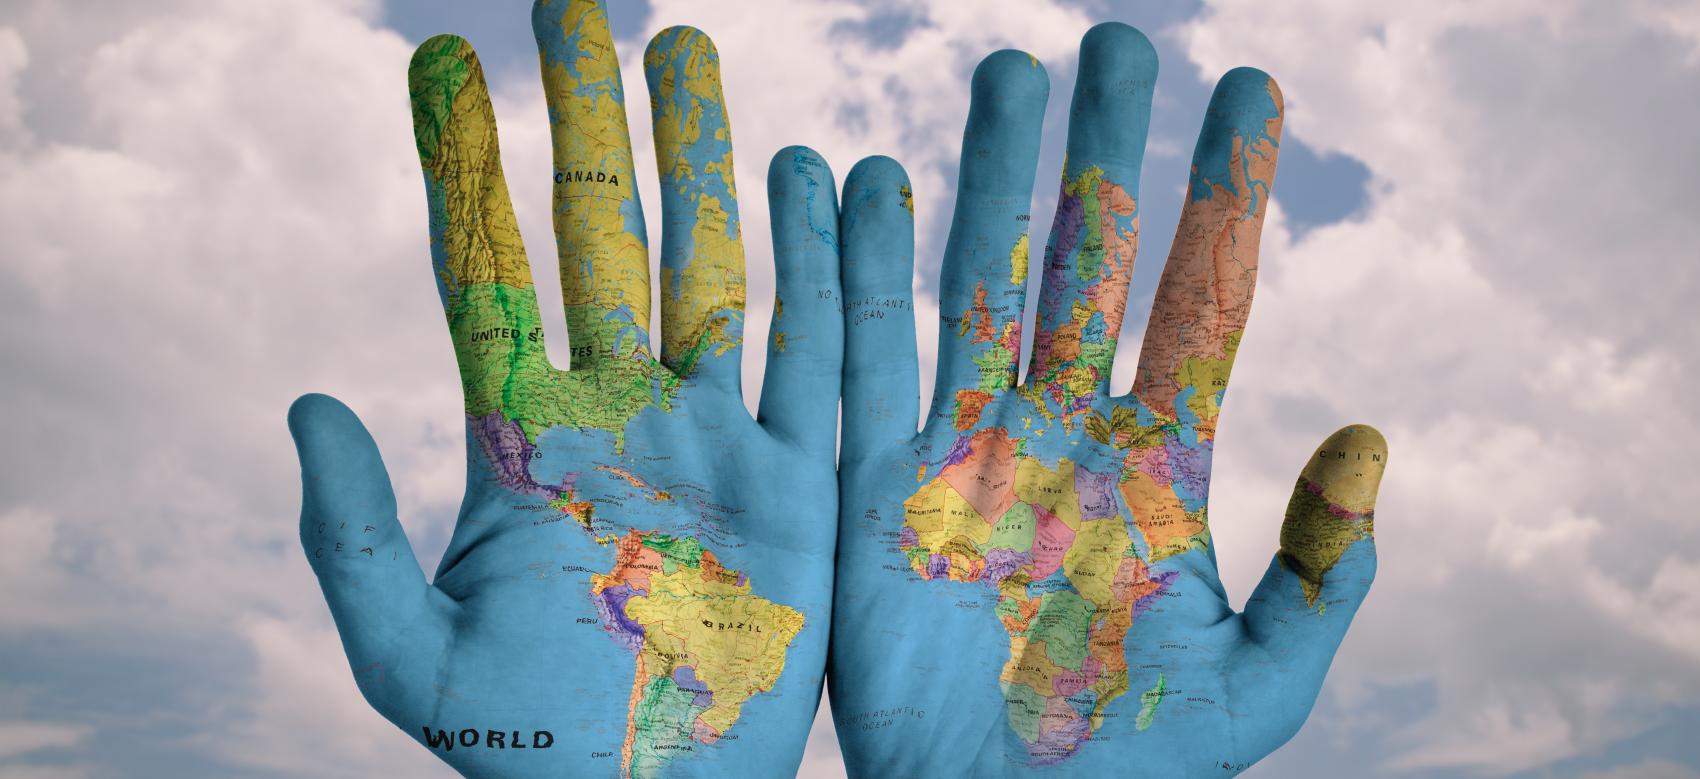 Hands with the image of a world map painted on them